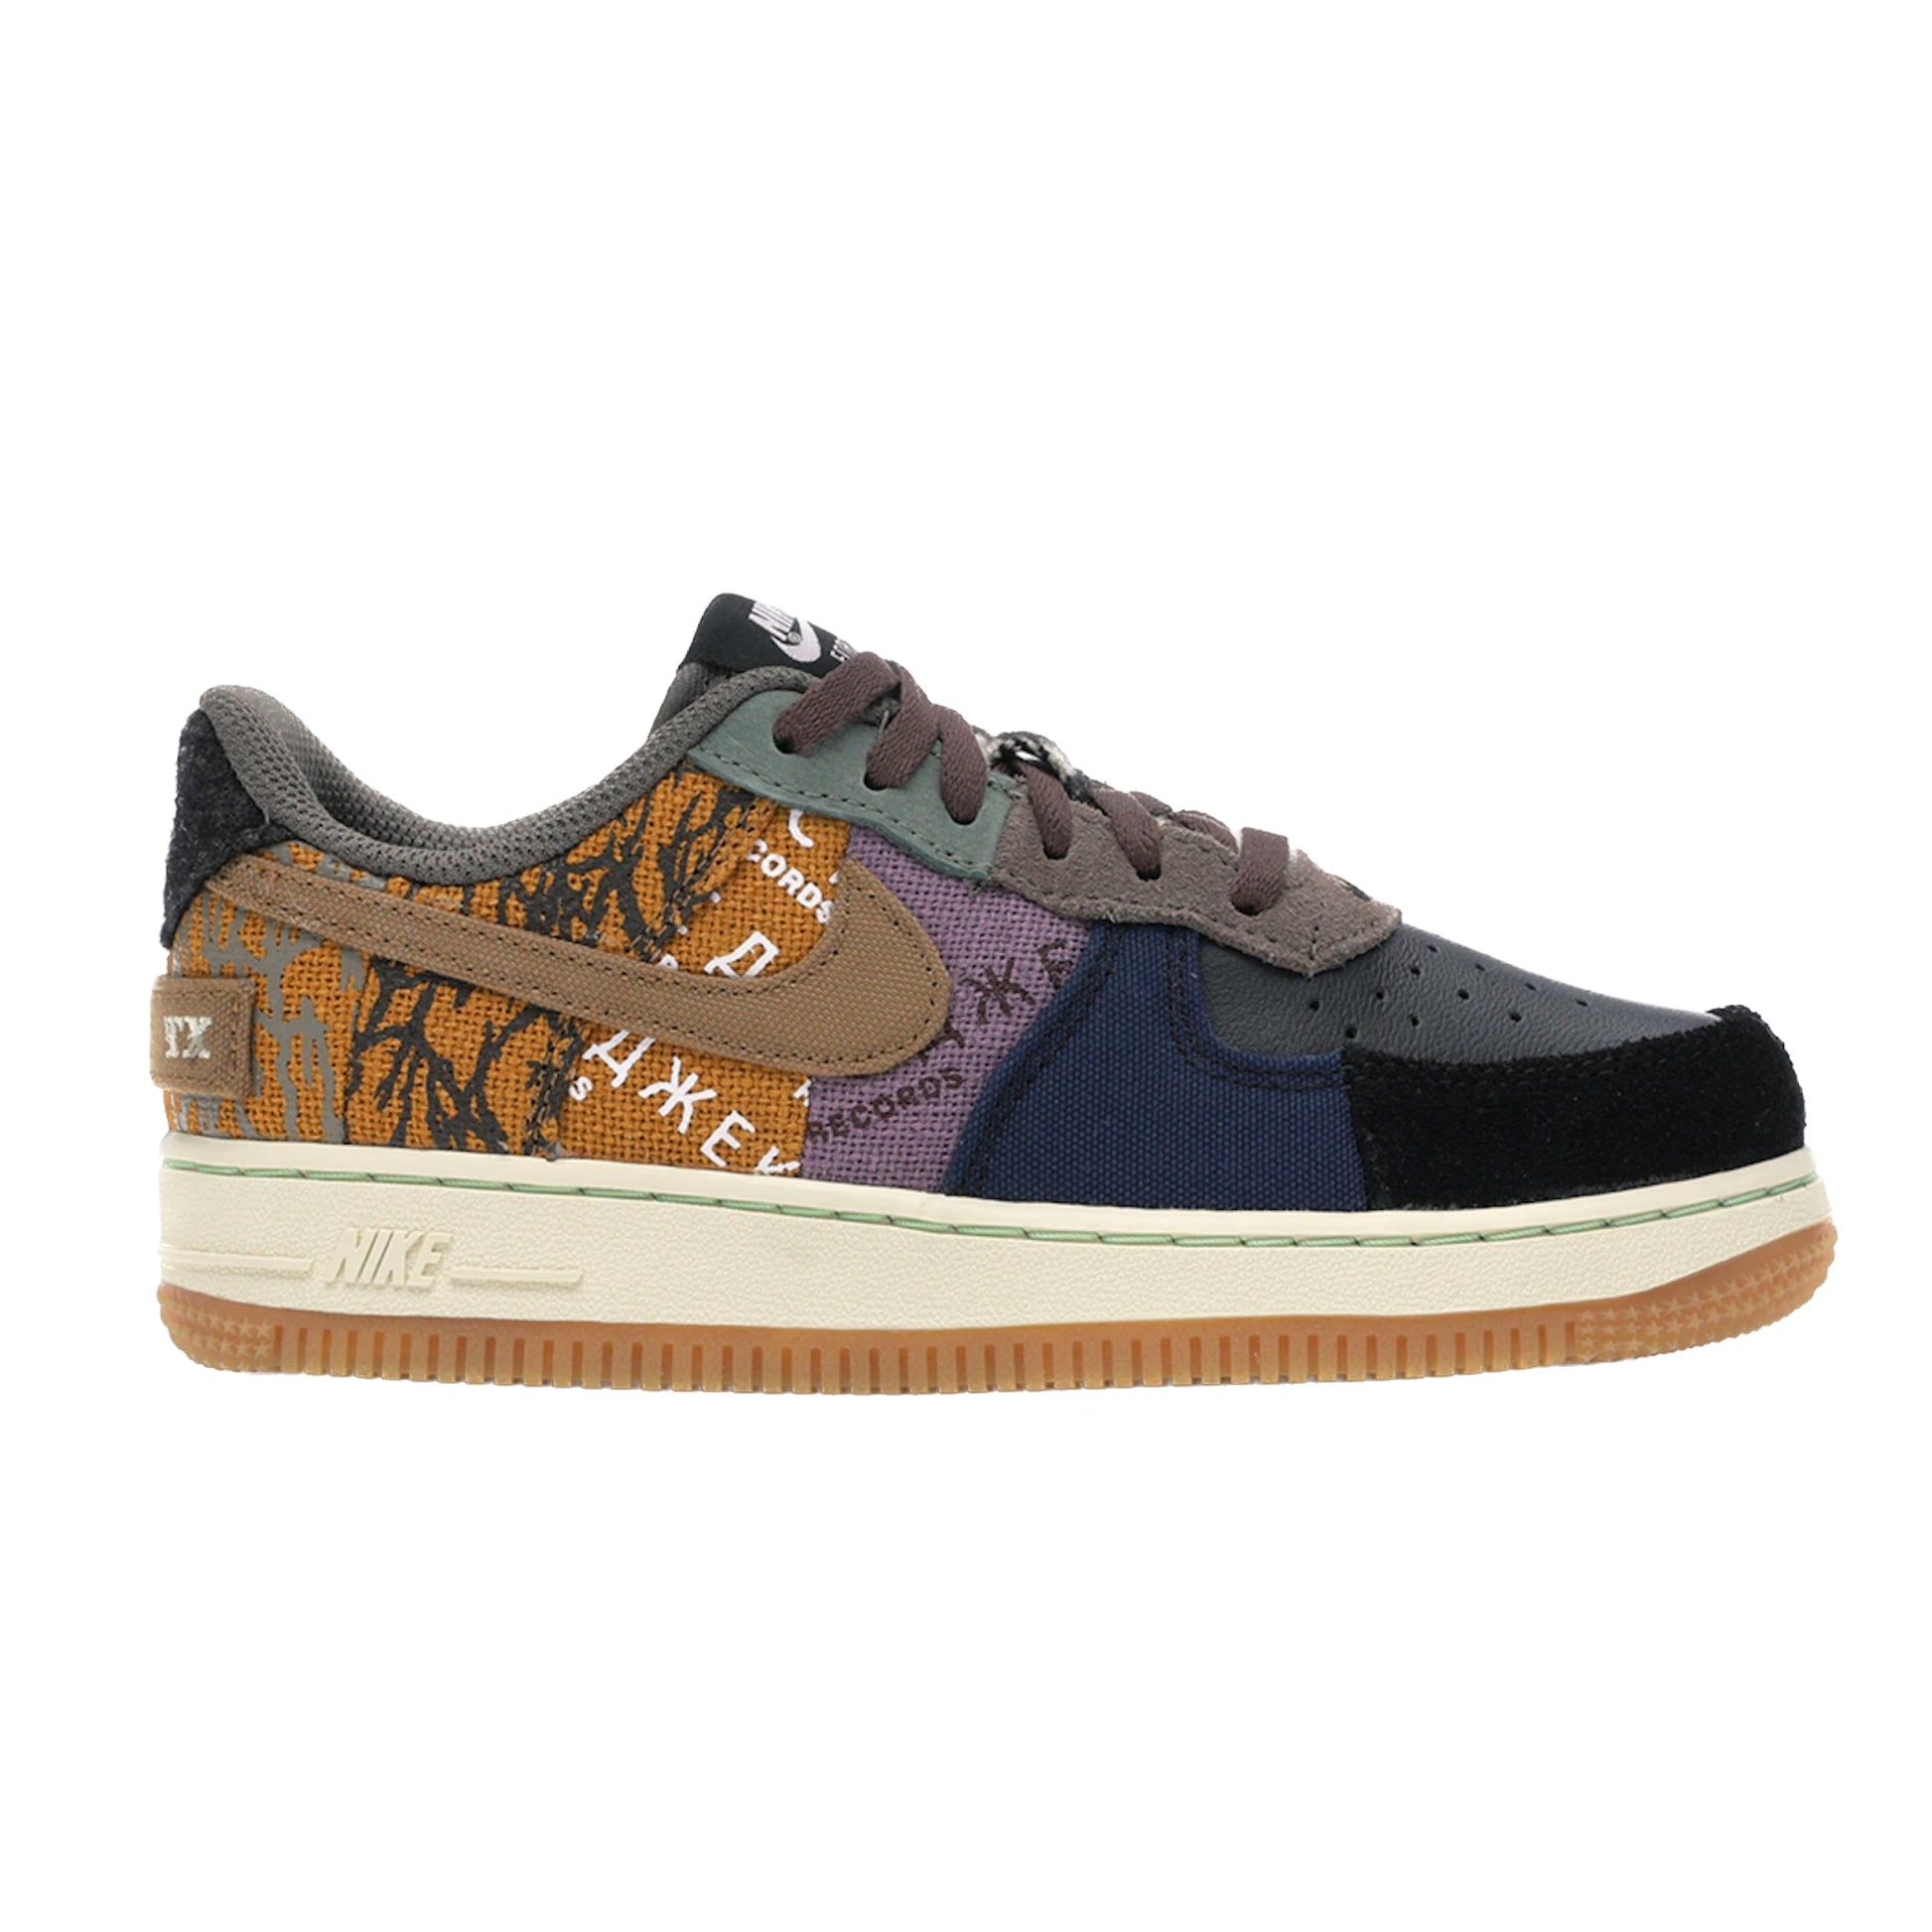 Nike Air Force 1 Low (PS) Travis Scott Cactus Jack Multi-Color Muted B ...